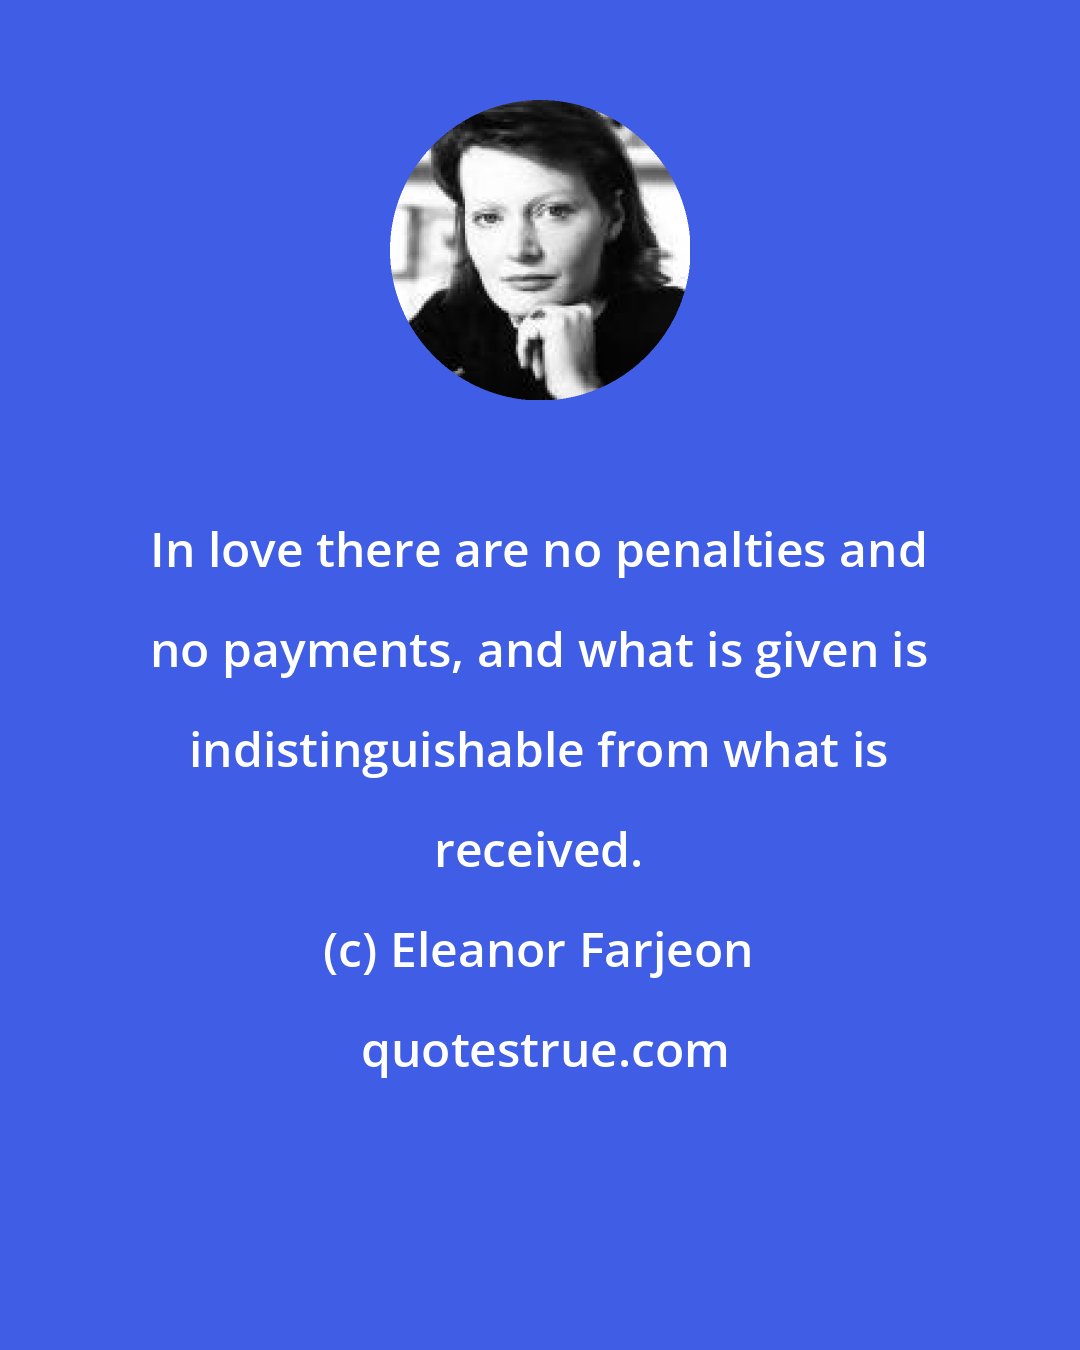 Eleanor Farjeon: In love there are no penalties and no payments, and what is given is indistinguishable from what is received.